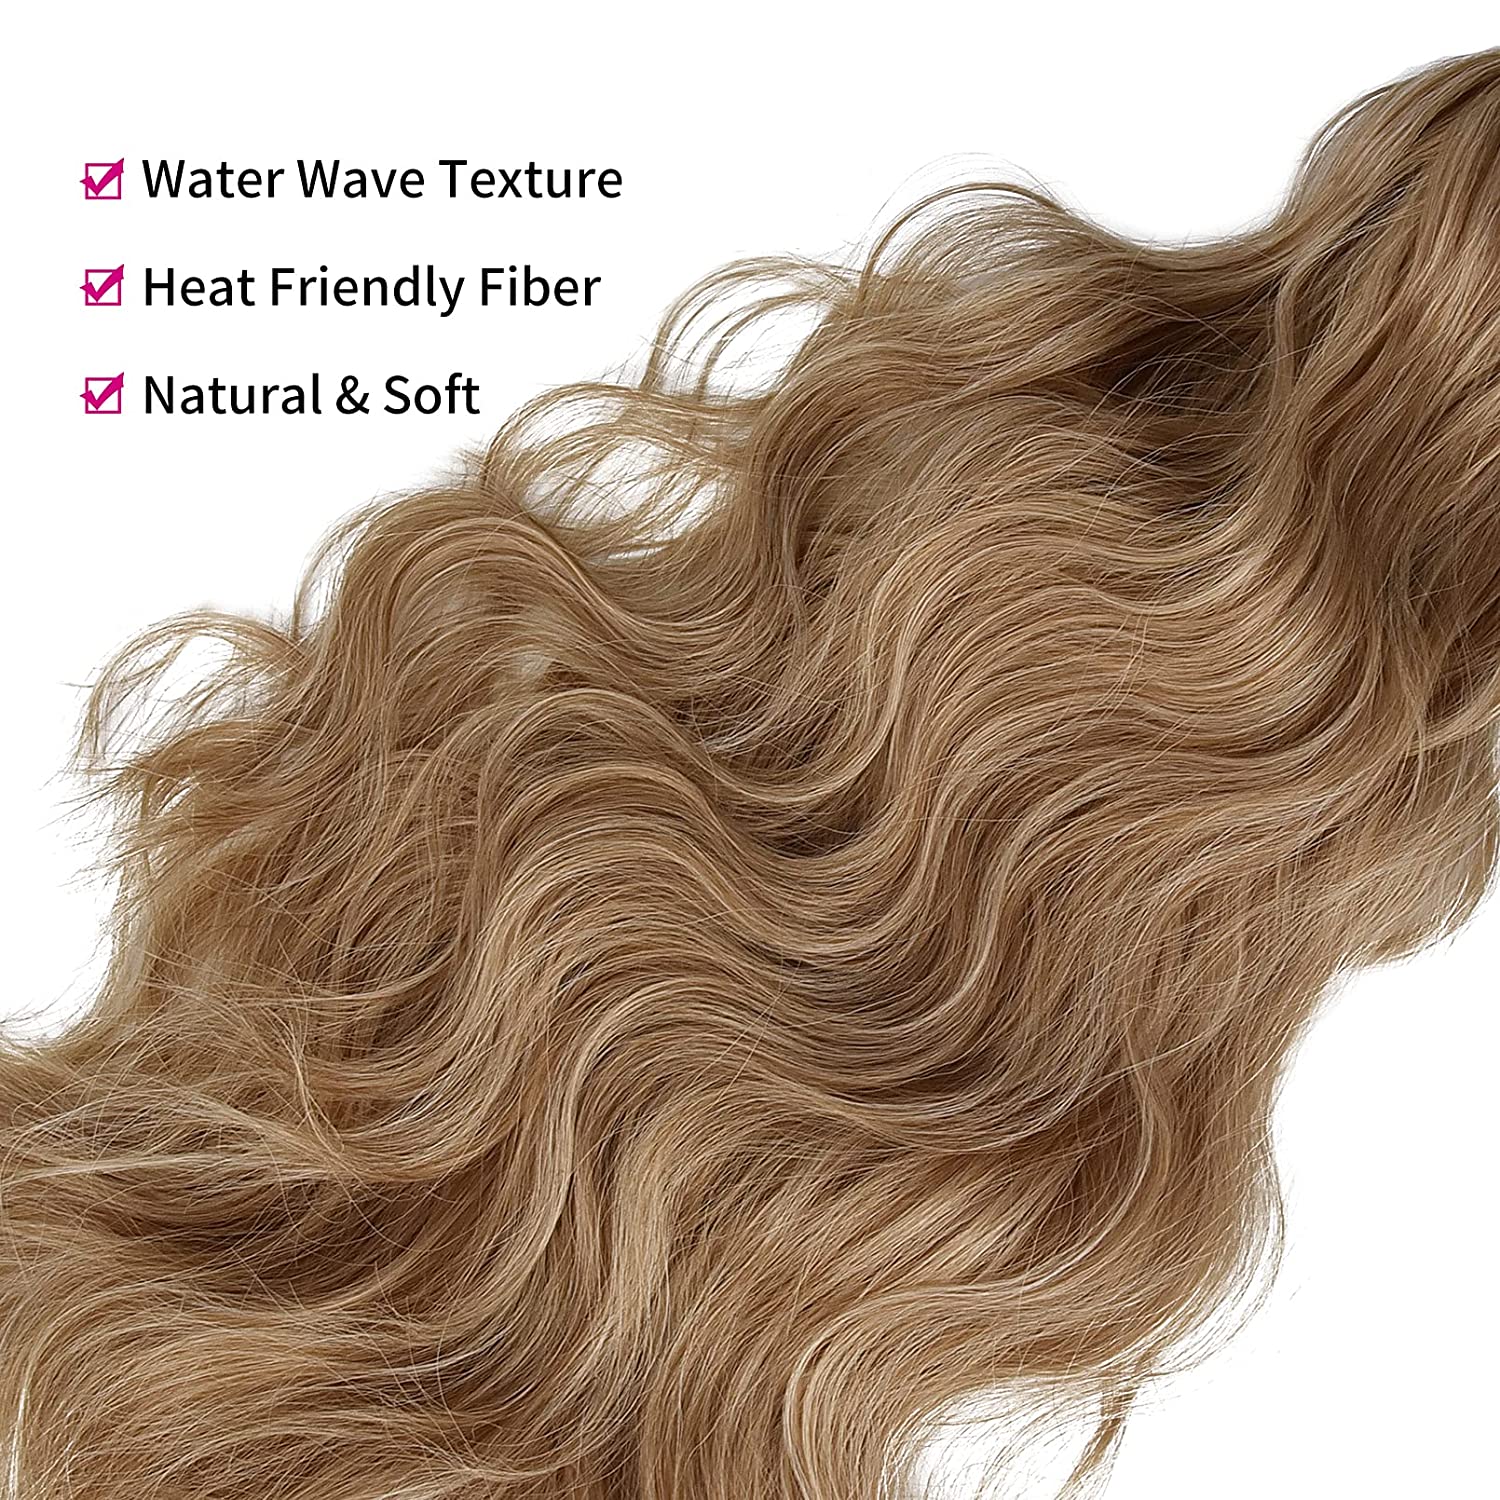 REECHO Ponytail Extension, Claw Clip in Wavy Curly Hair Extension Jaw Clip on Pony Tail Hairpiece for Women